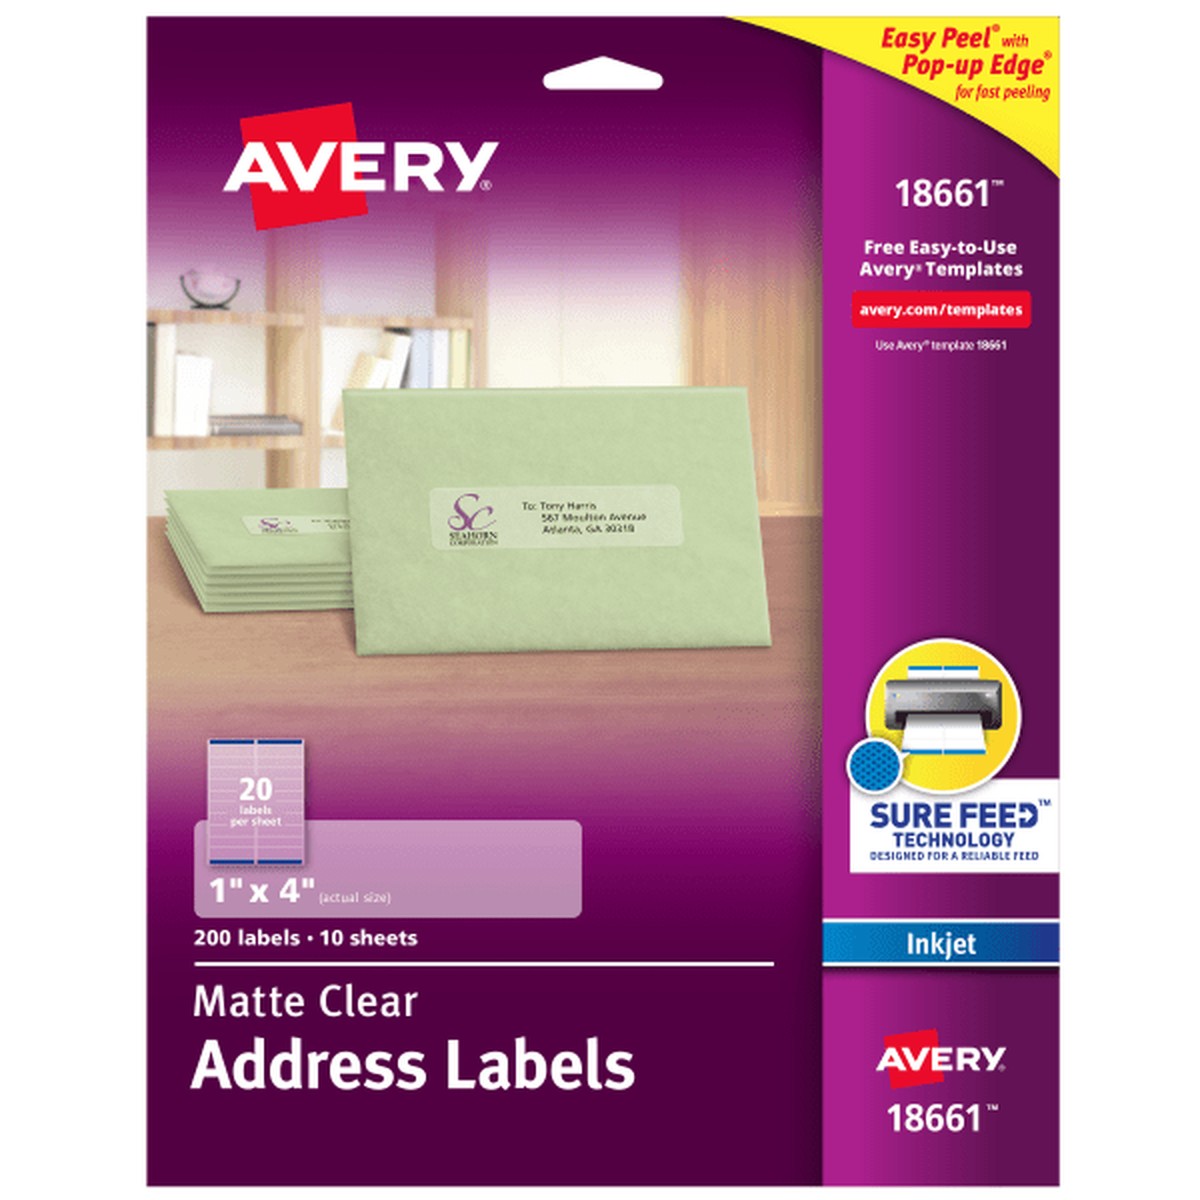 Avery Easy Peel Inkjet Printer Mailing Labels - 1" Width x 4" Length - Permanent Adhesive - Rectangle - Inkjet - Clear - Fi